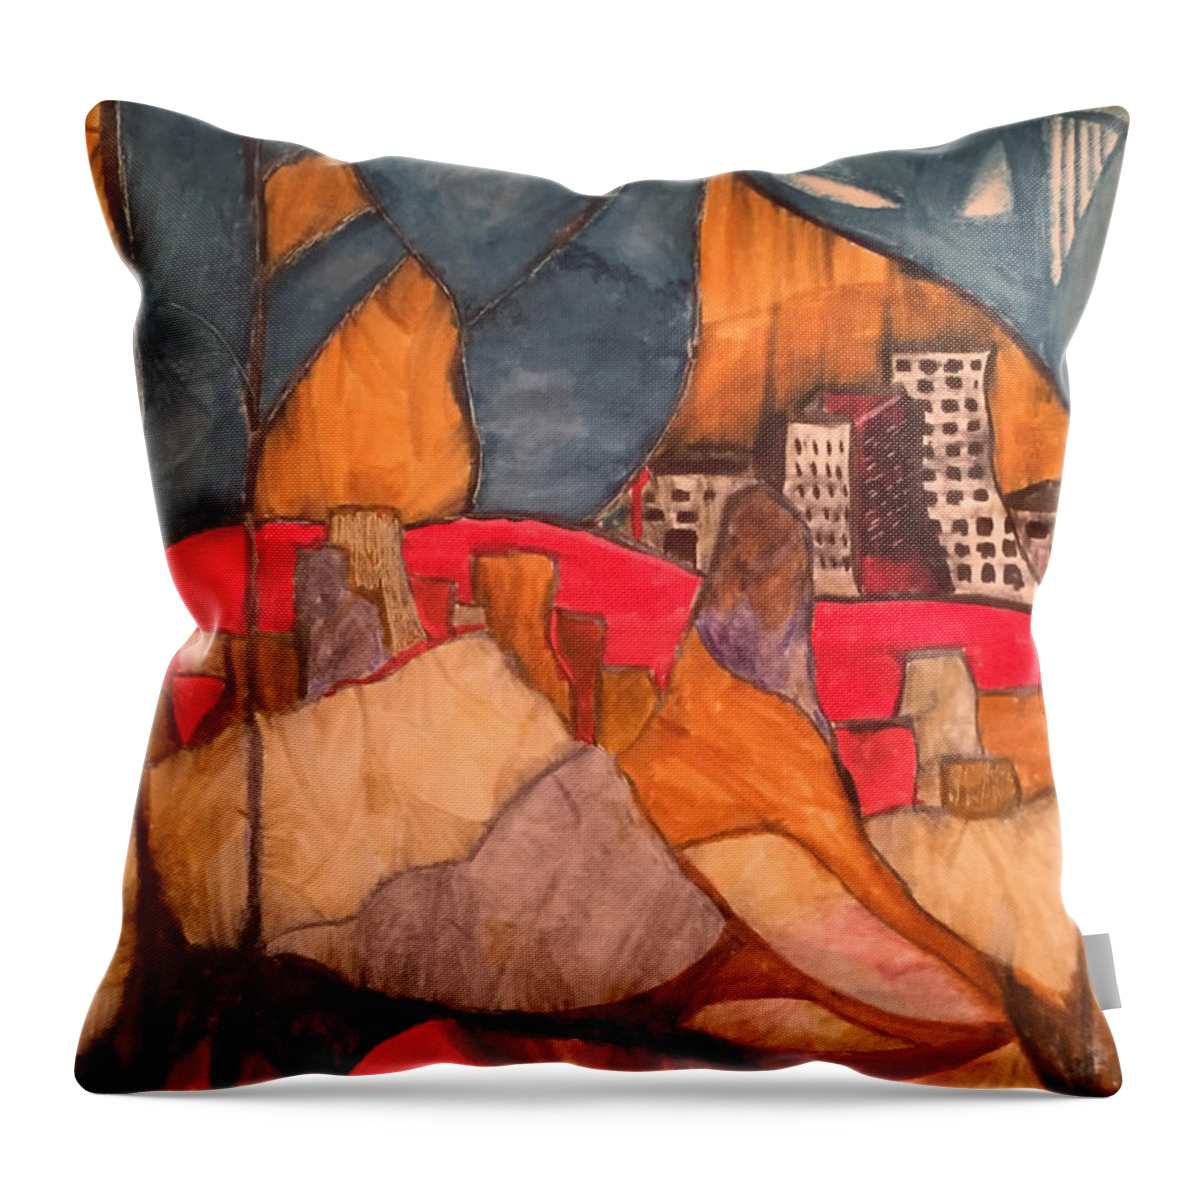  Throw Pillow featuring the painting Elephant Sky by Dennis Ellman